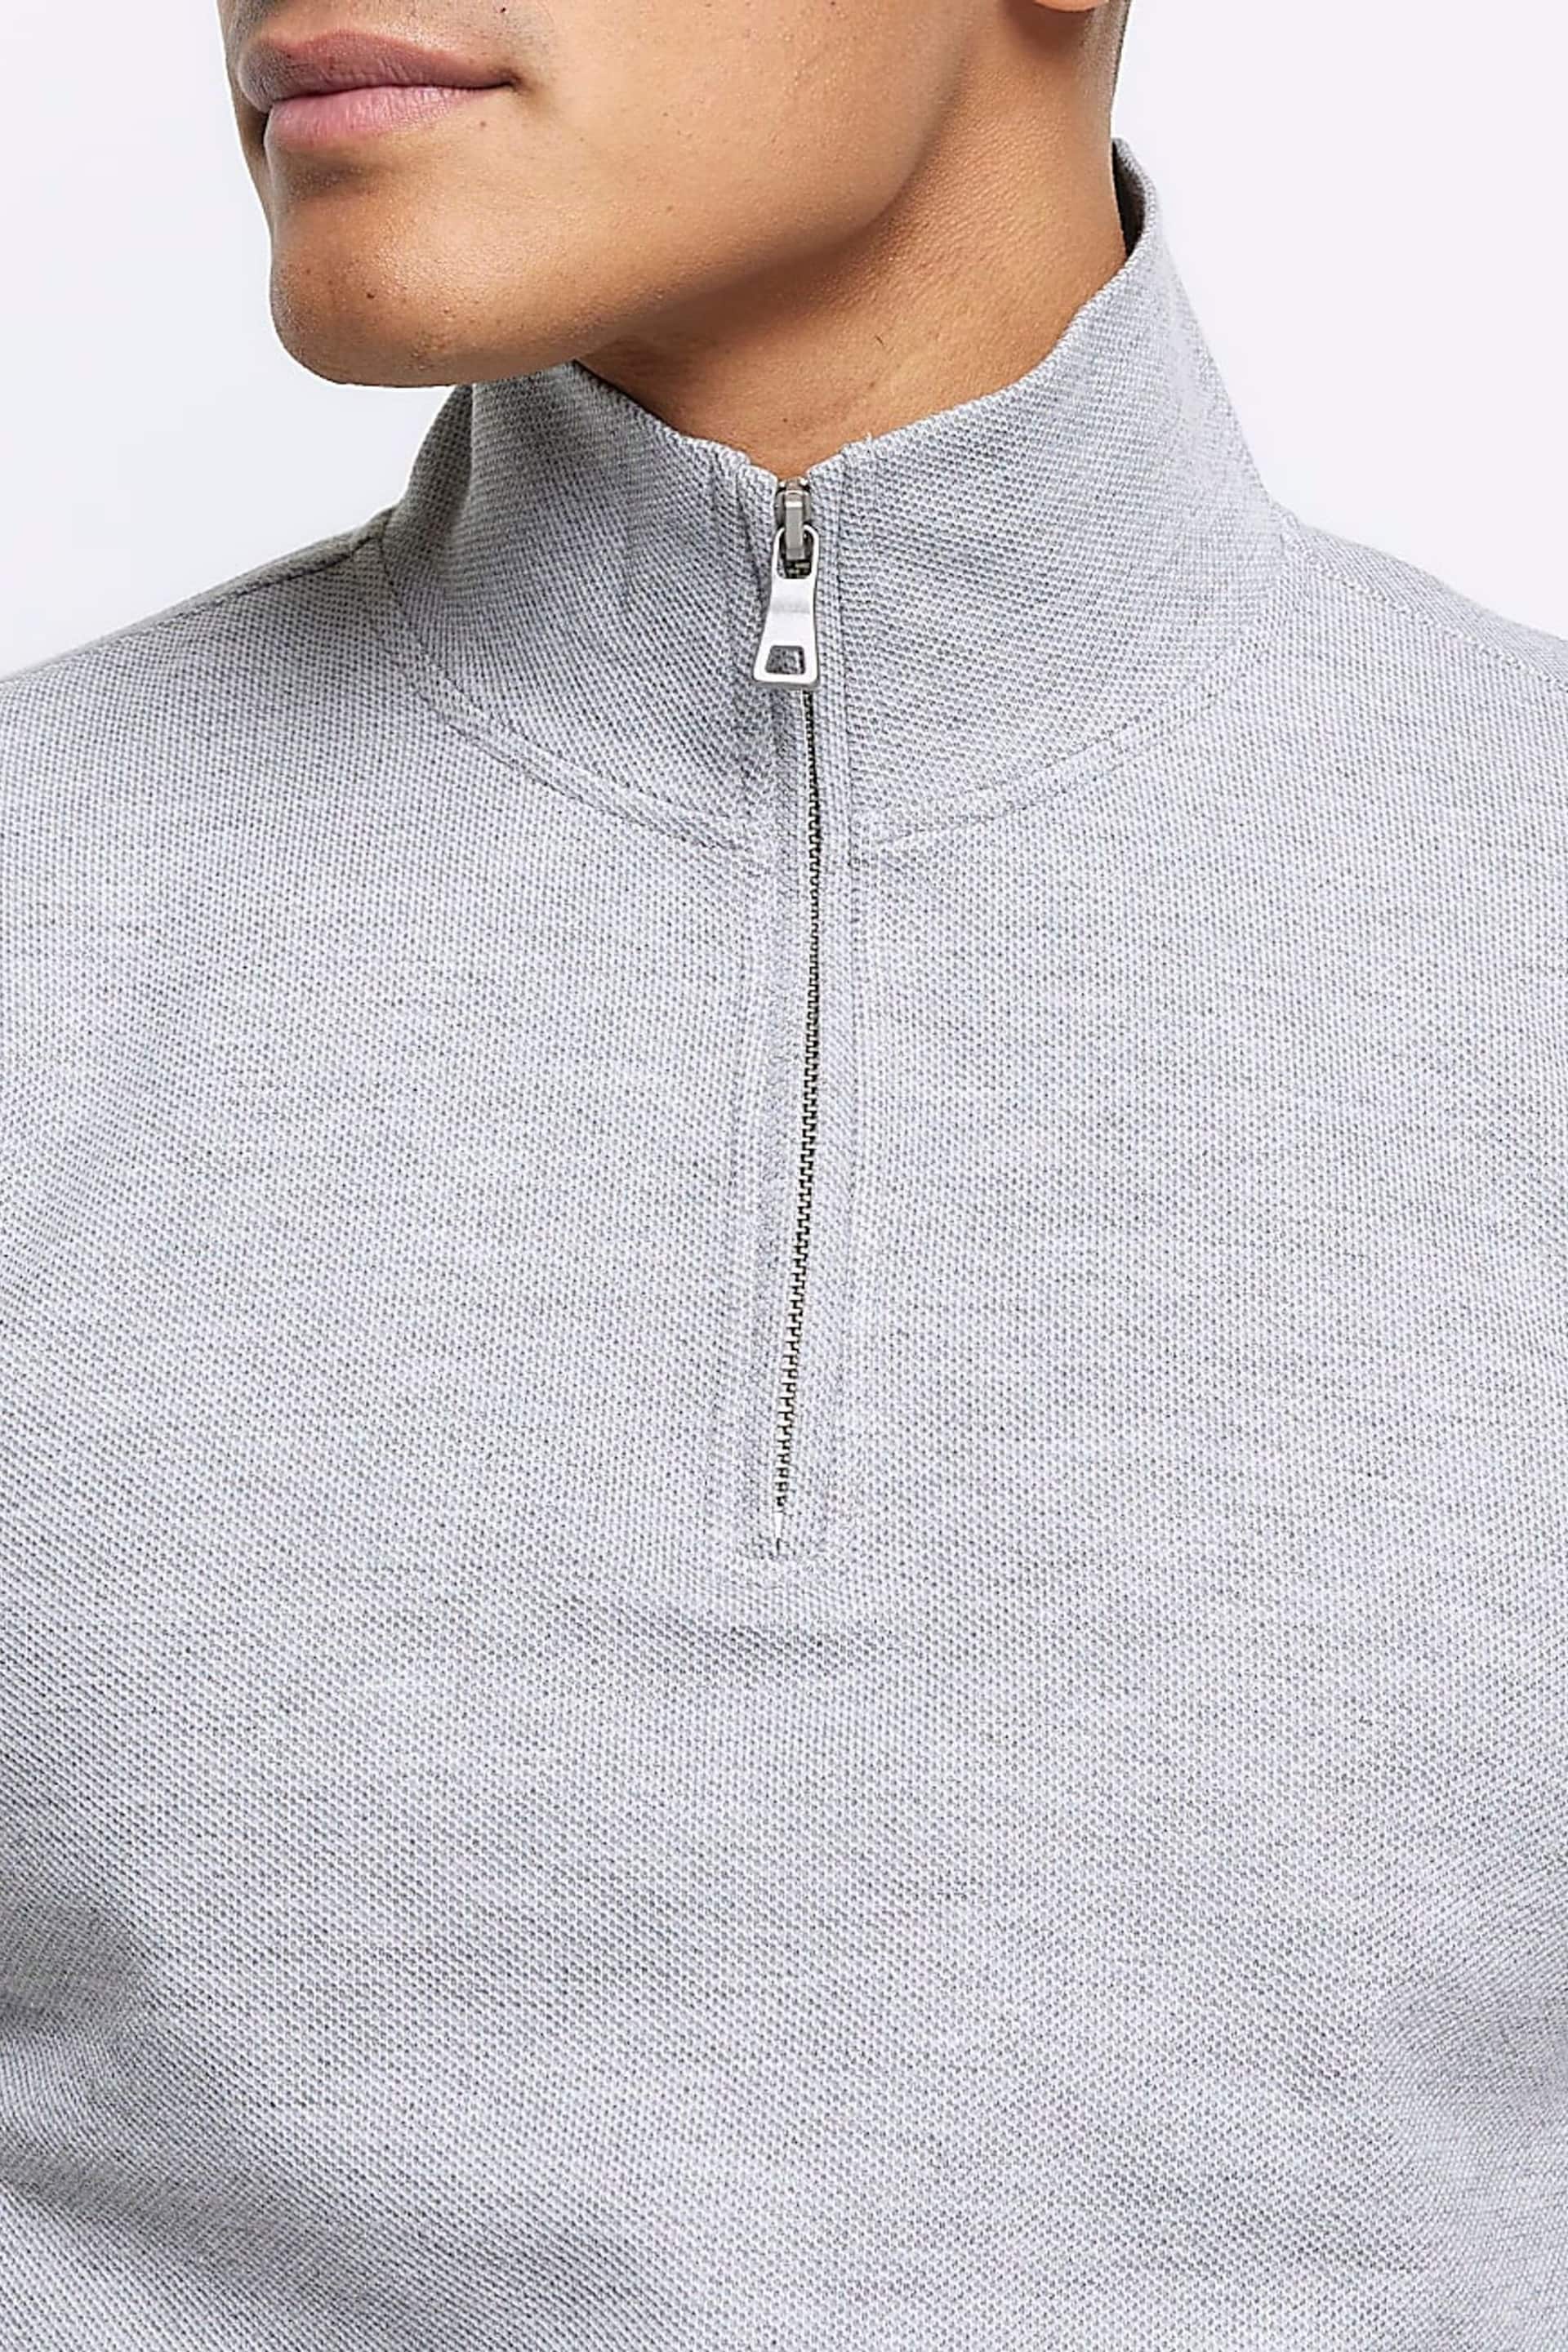 River Island Grey Slim Fit Textured Funnel Neck Sweat Shirt - Image 4 of 6